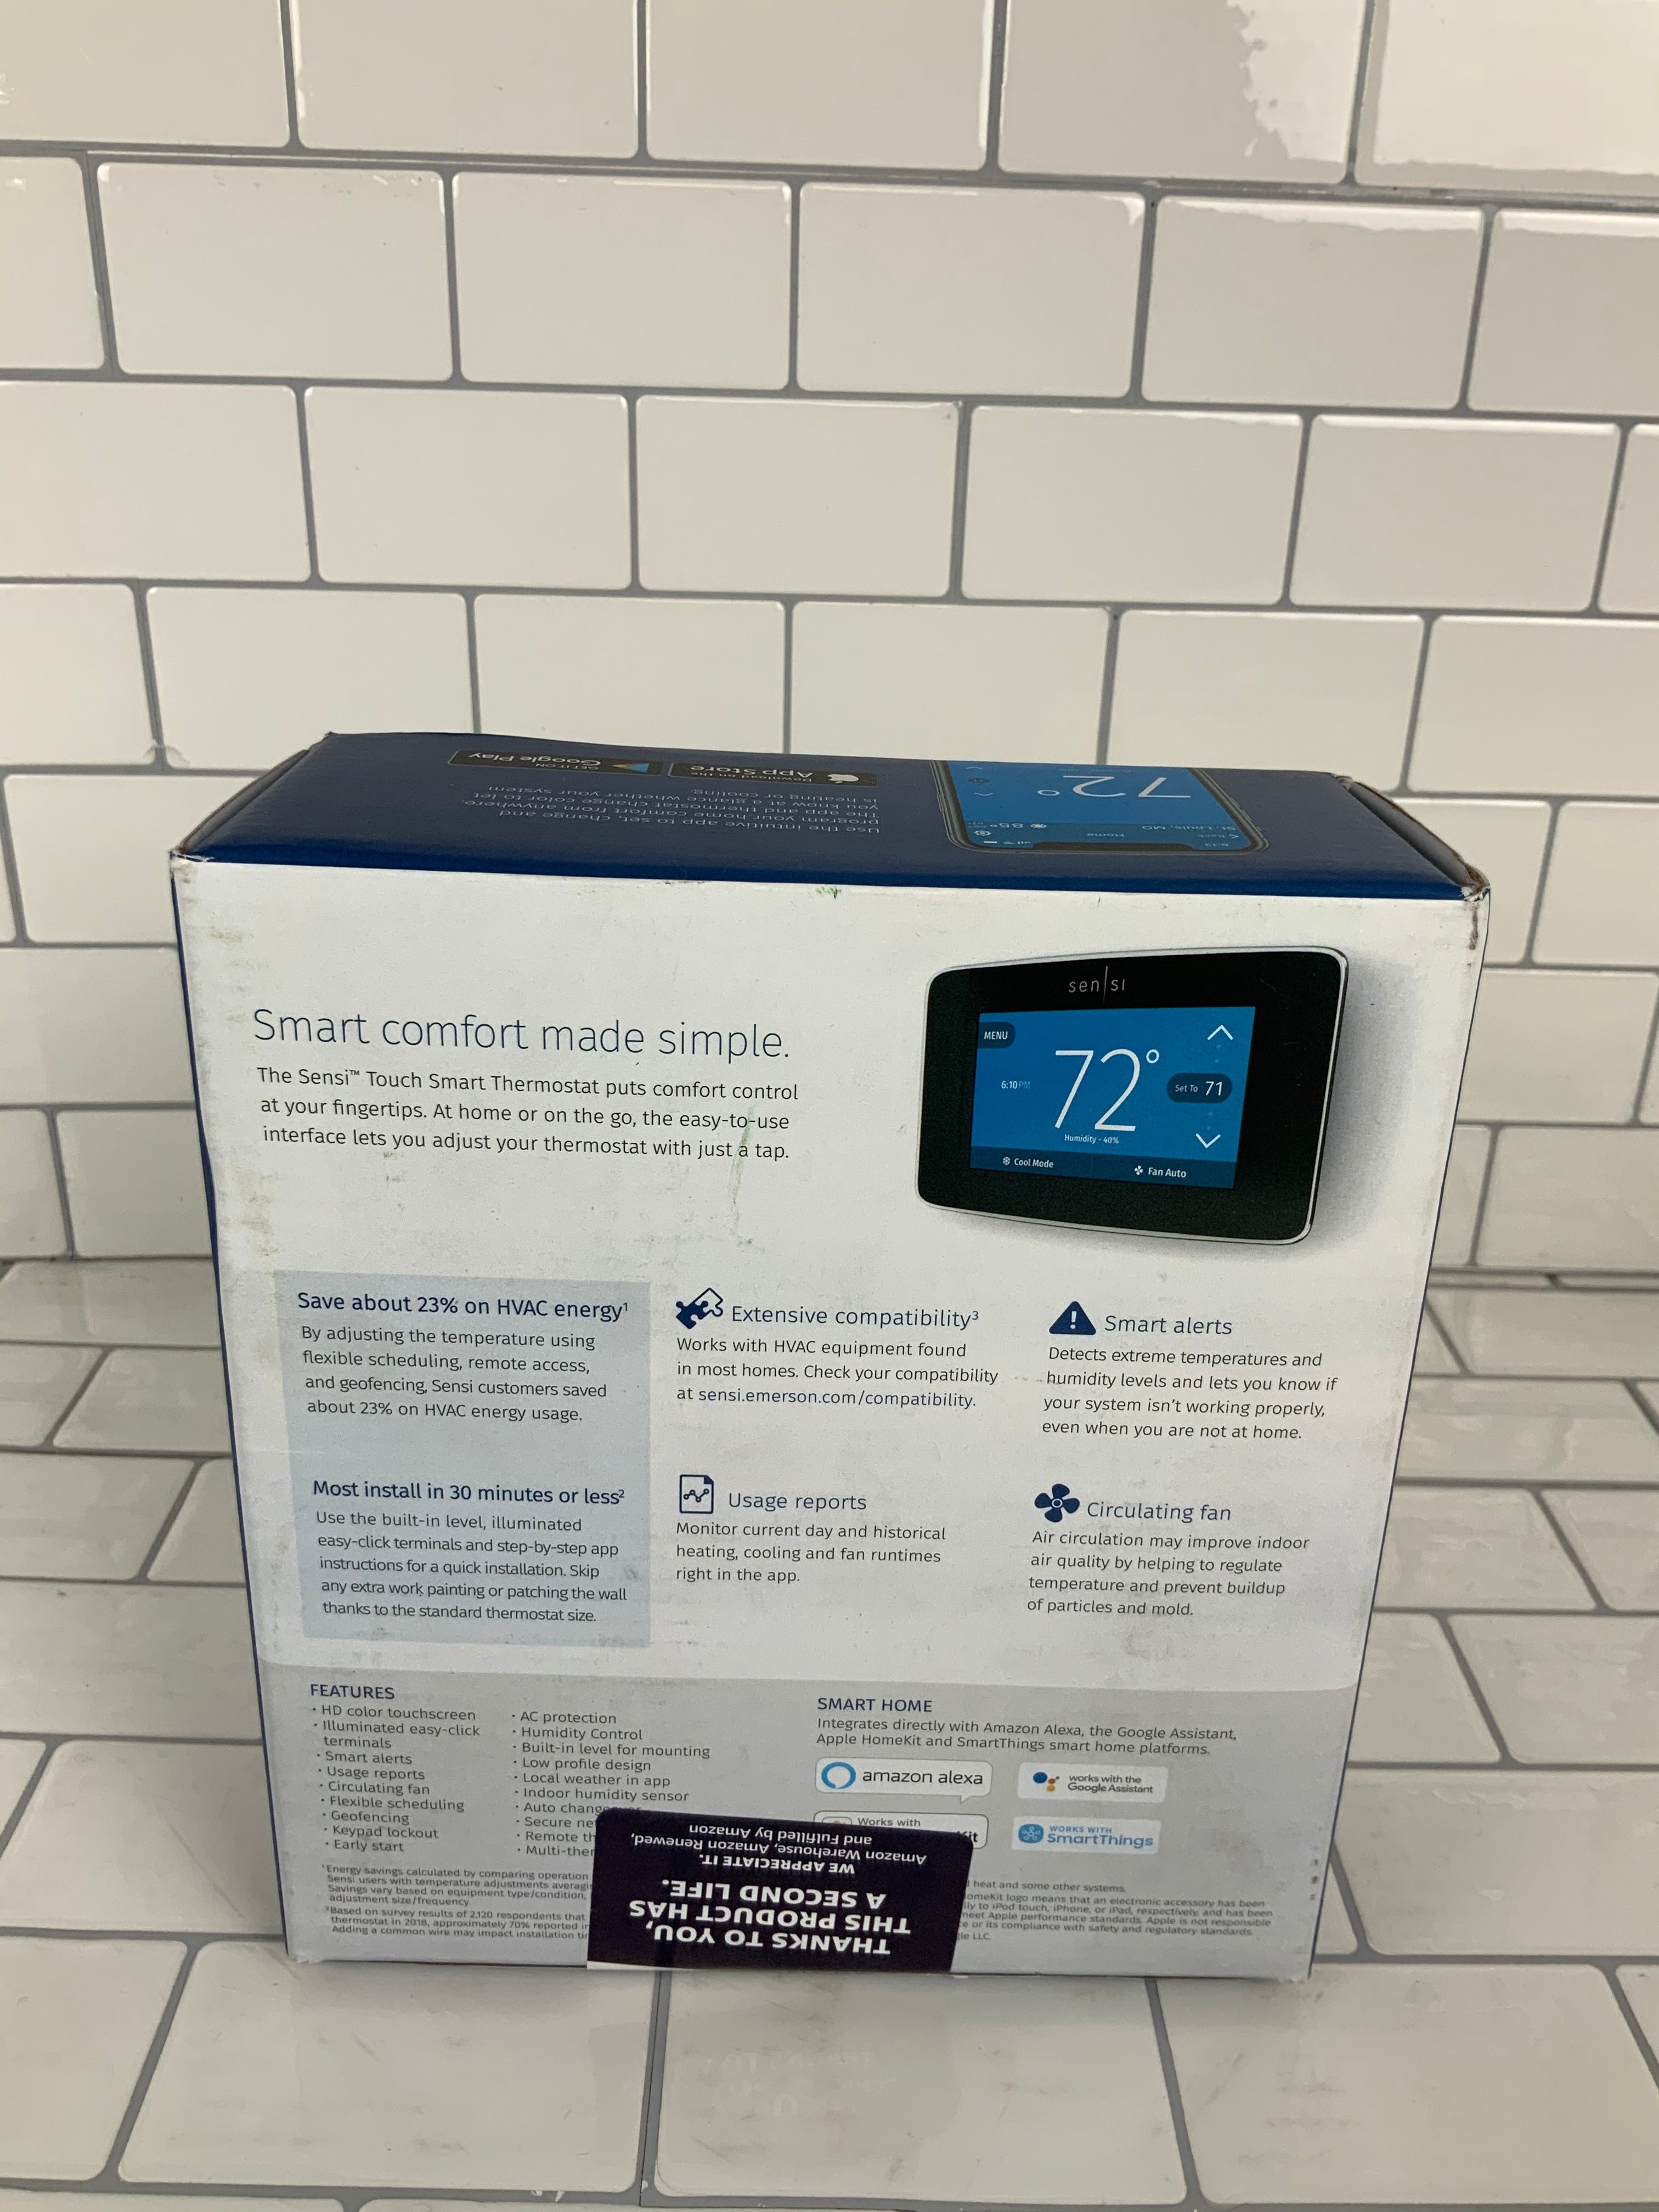 Emerson Sensi Wi-Fi Smart Thermostat w/Touchscreen Color Display-C-wire Required (7452570616046)